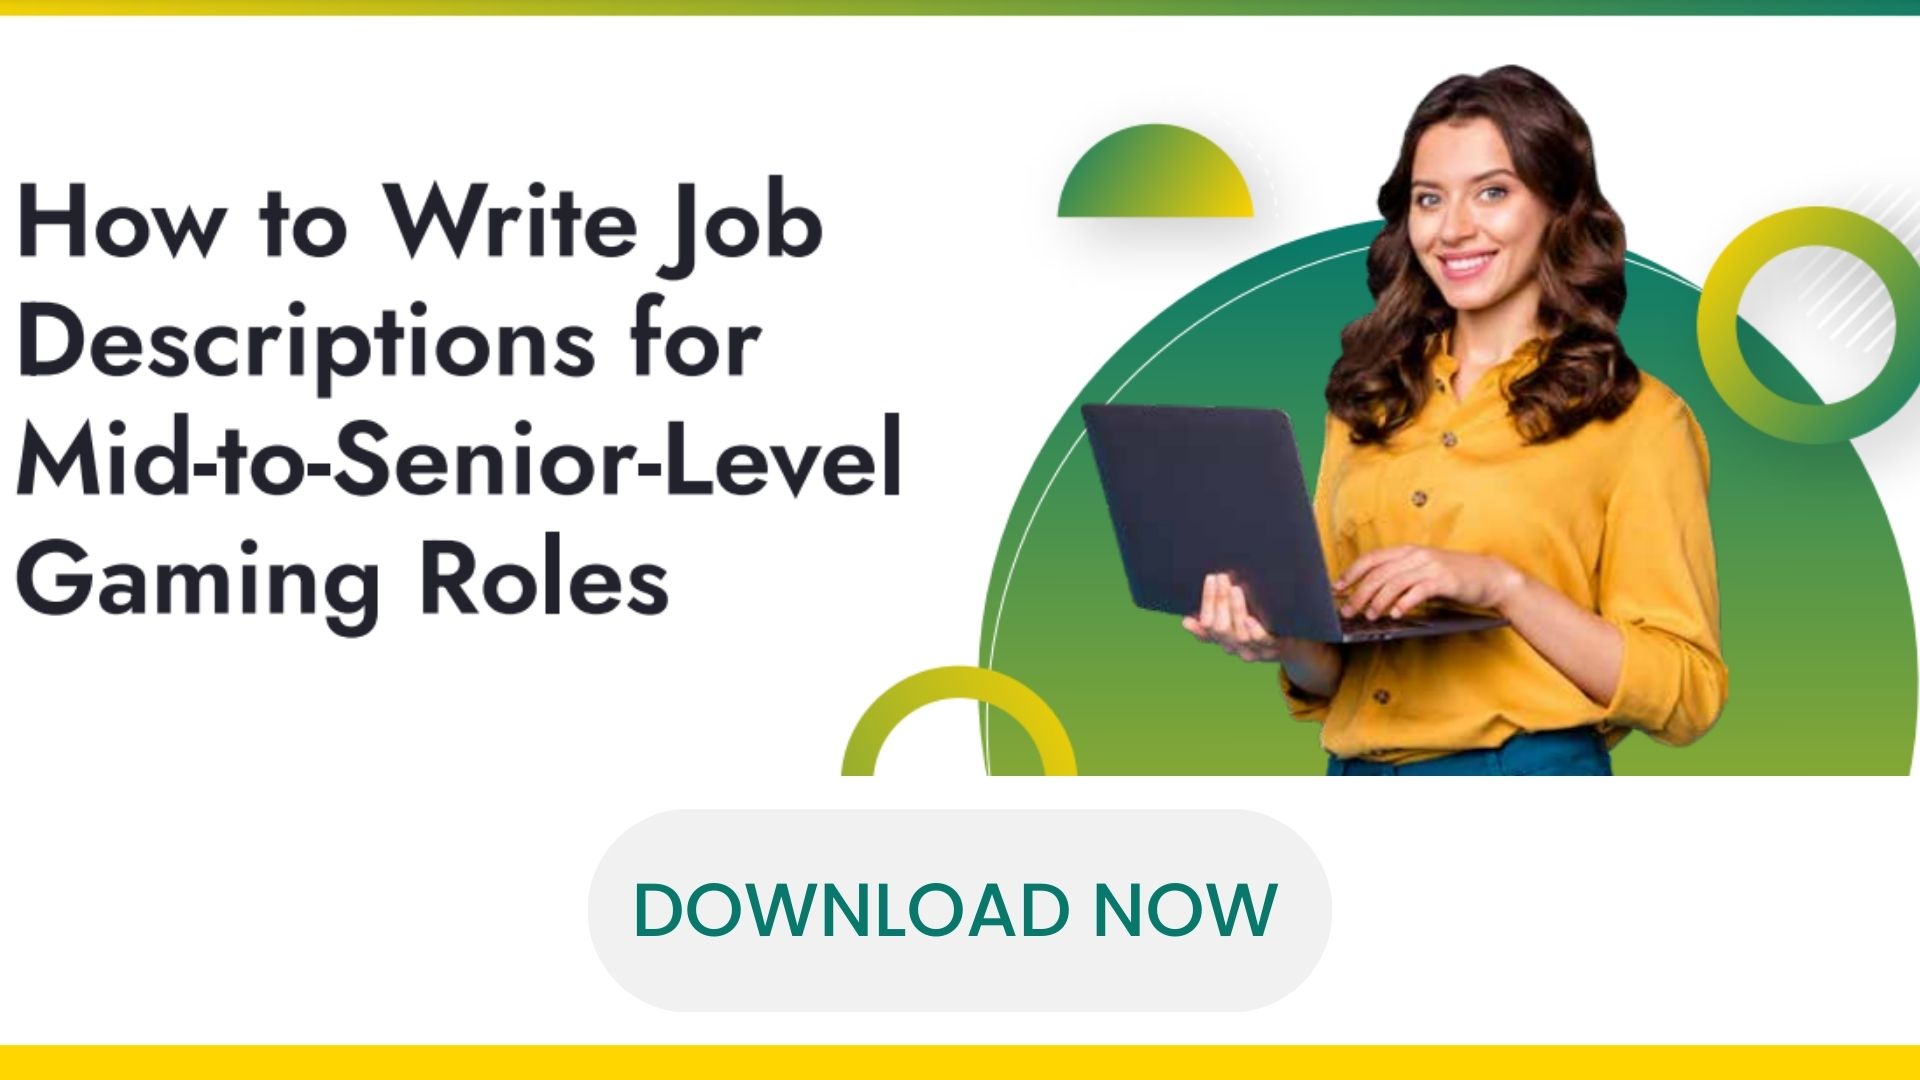 how to write job descriptions for gaming roles